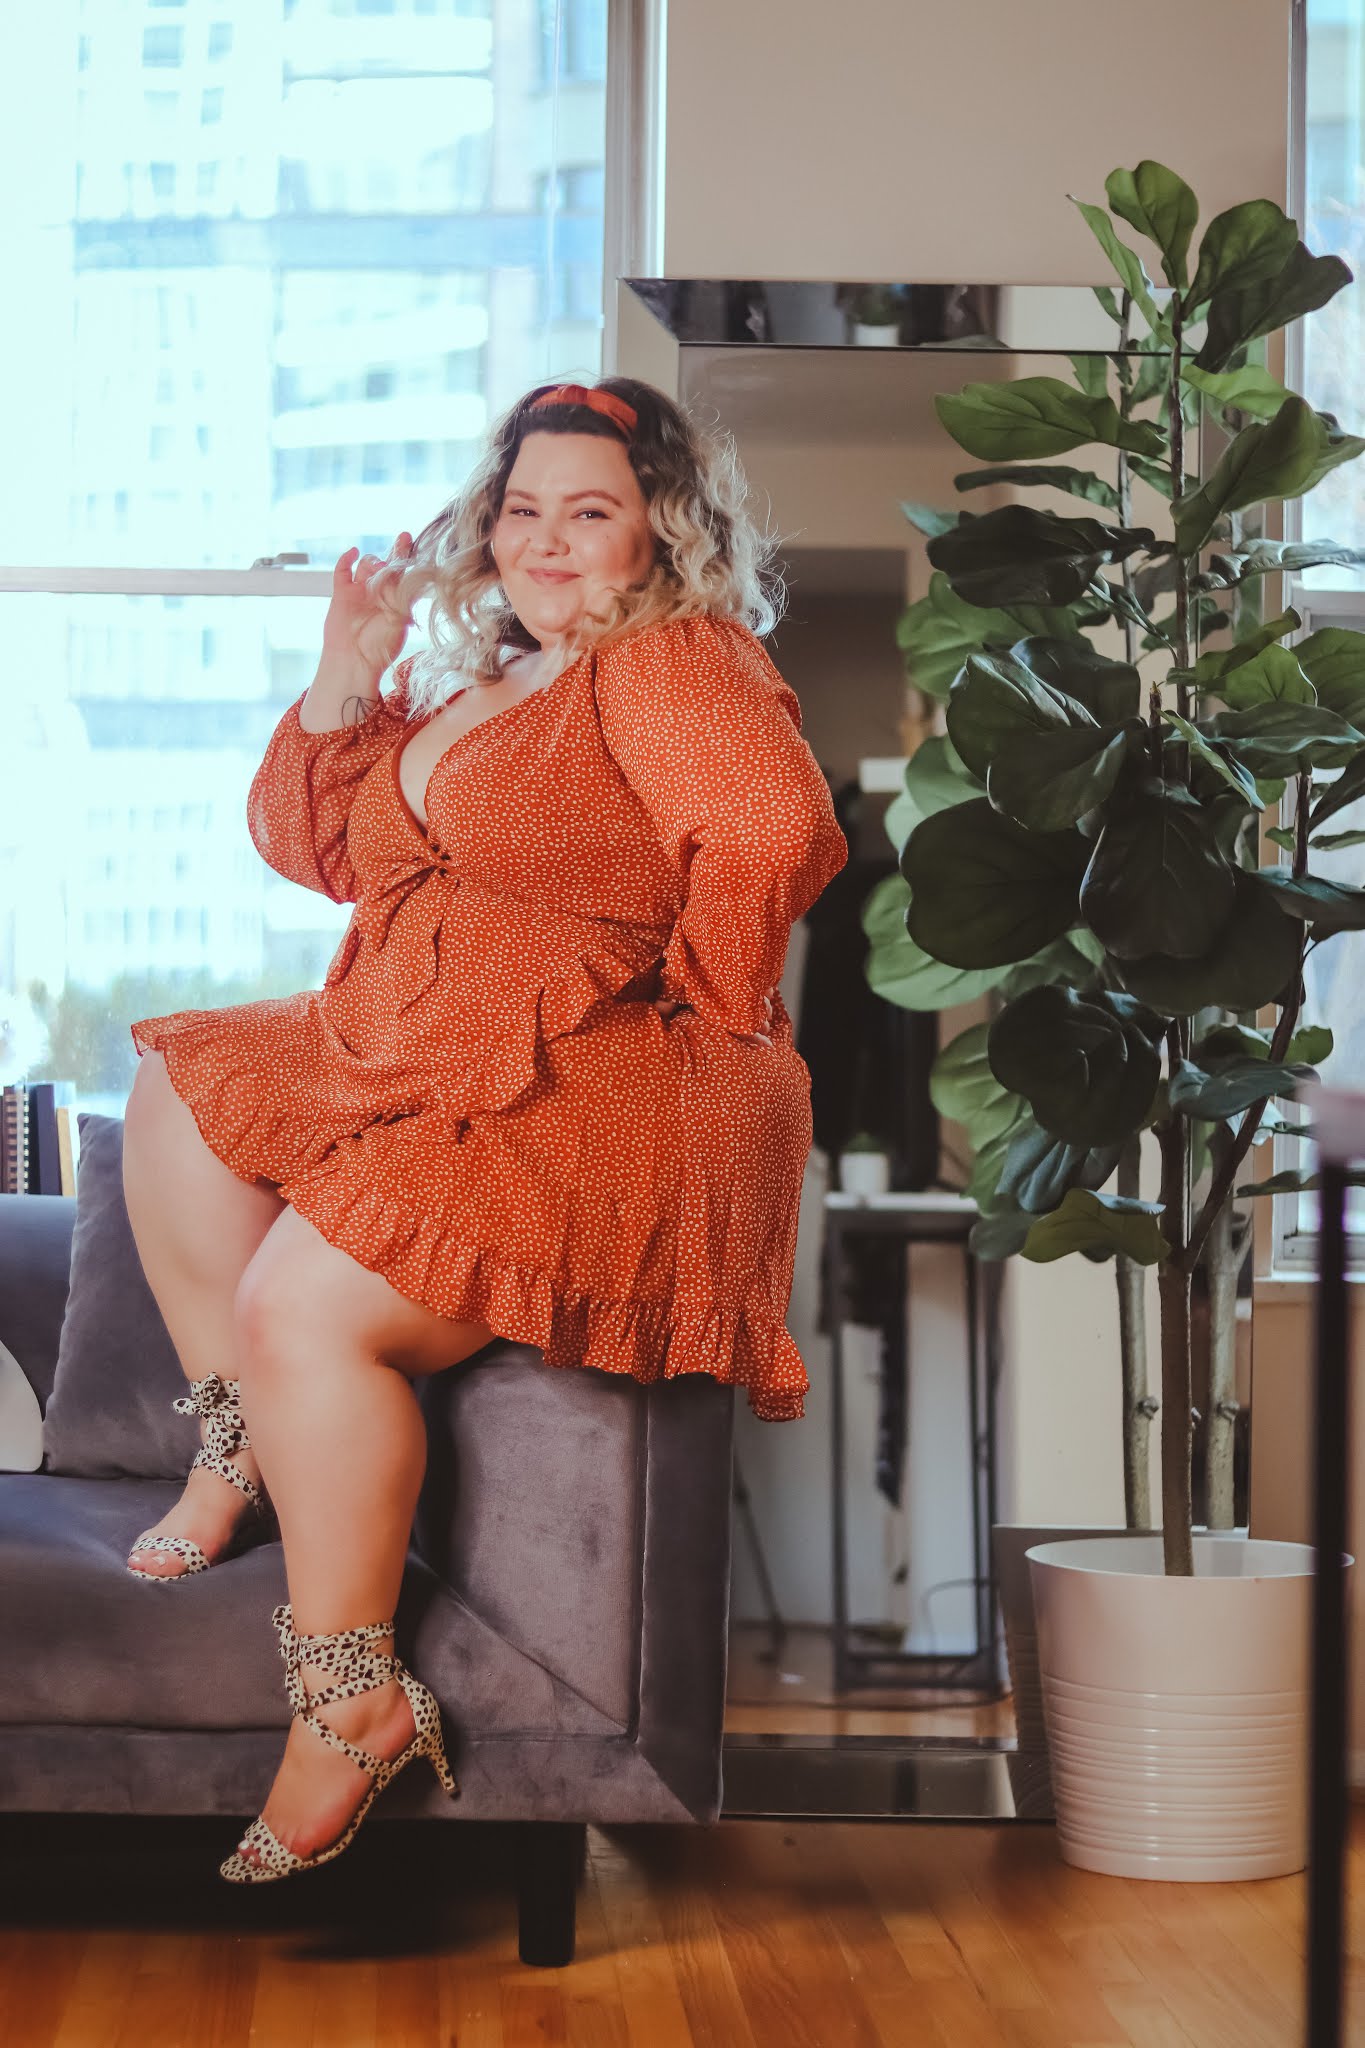 Chicago Plus Size Petite Fashion Blogger, influencer, YouTuber, and model Natalie in the City shares her latest work from home outfit Adore Me's ready to wear ruffle mini dress.